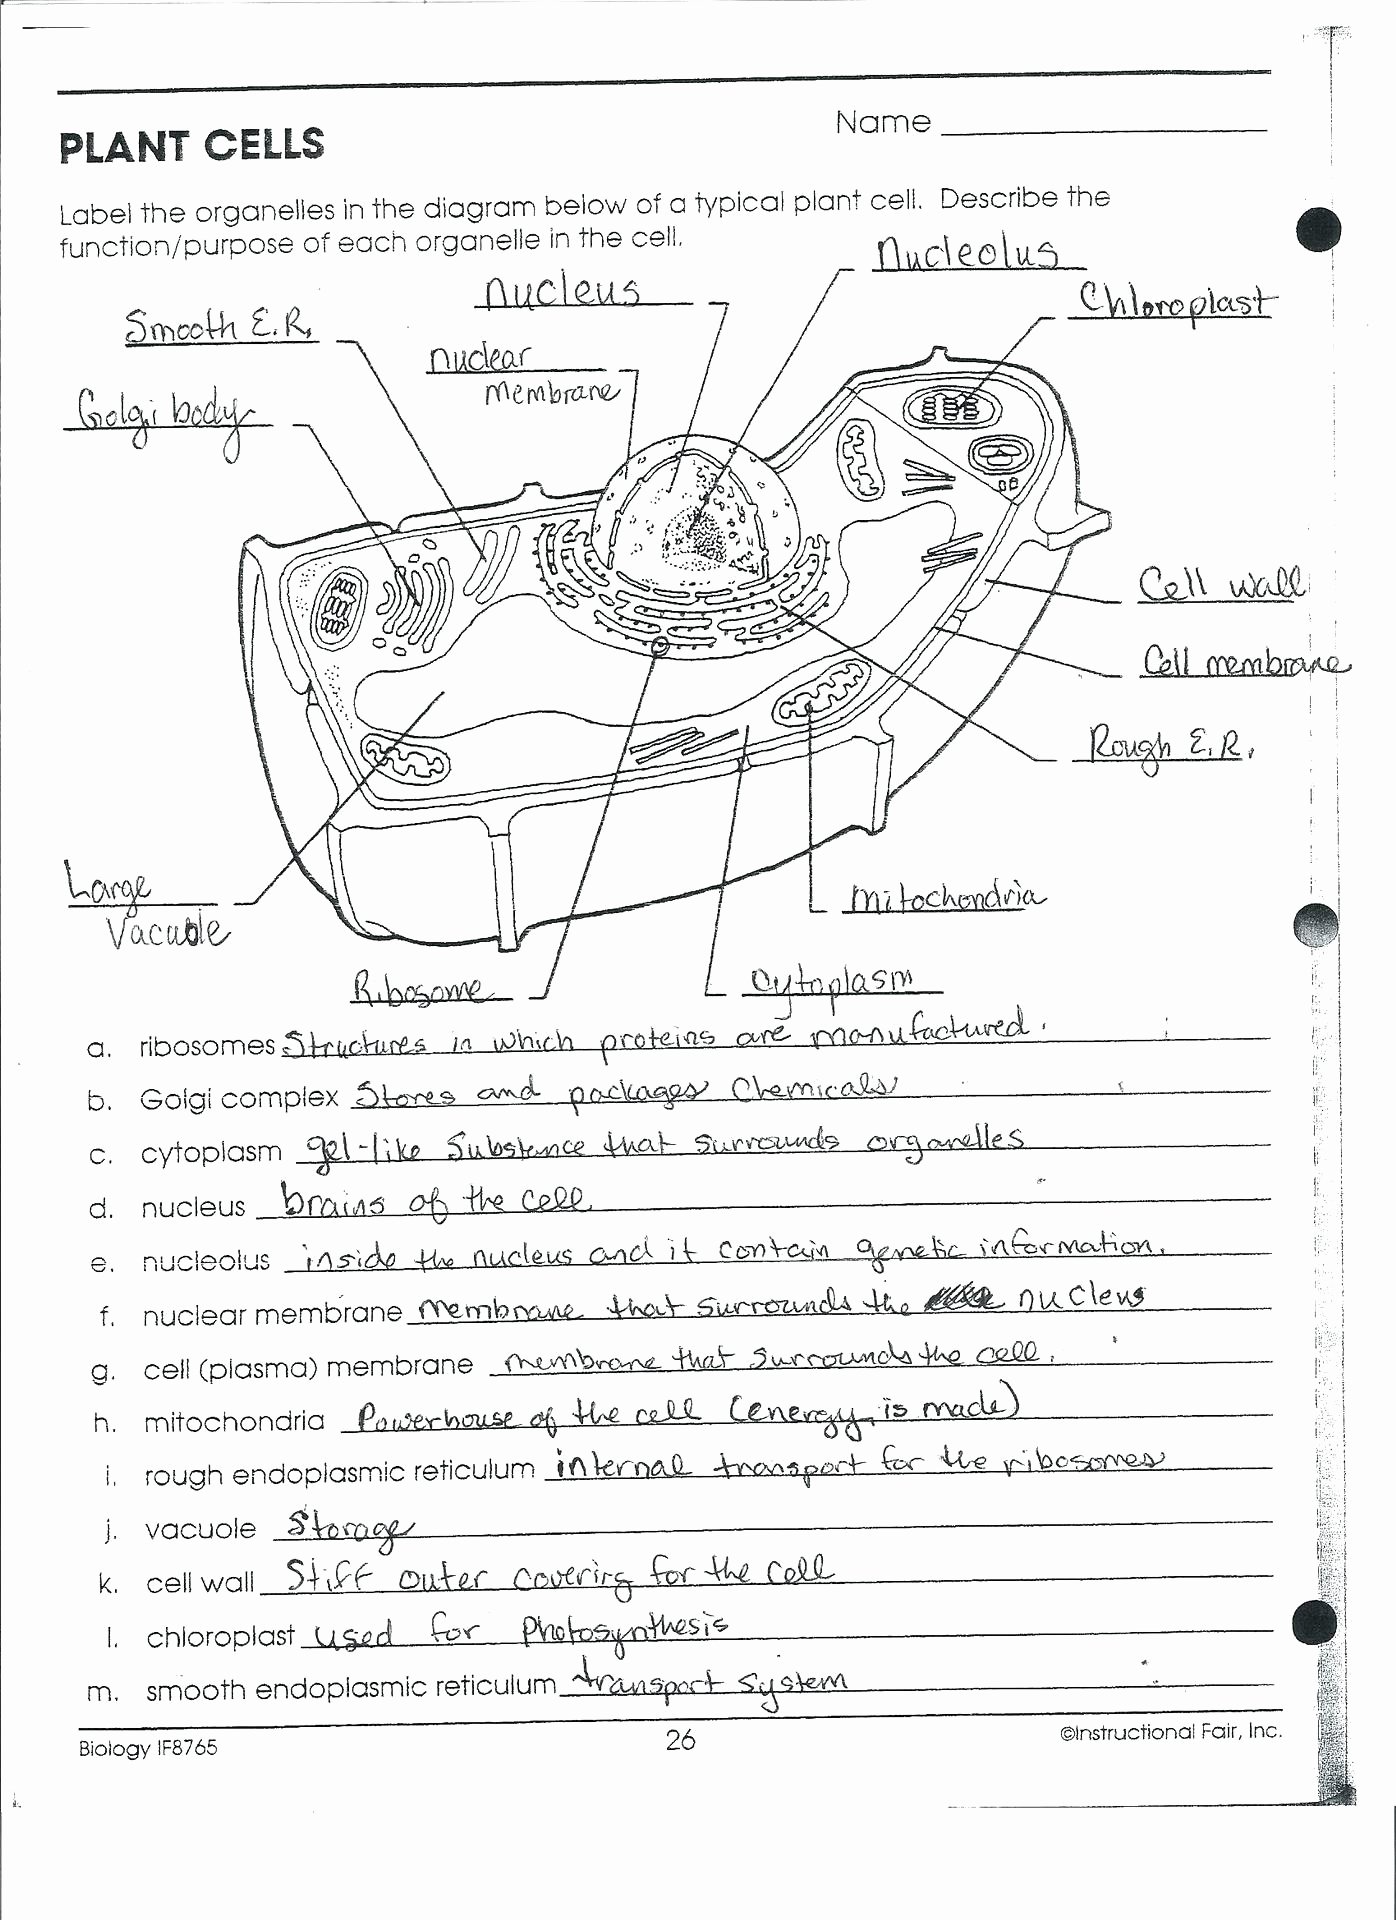 Plant Cell Worksheet Answers New Animal and Plant Cell Labeling Worksheet Answers the Best